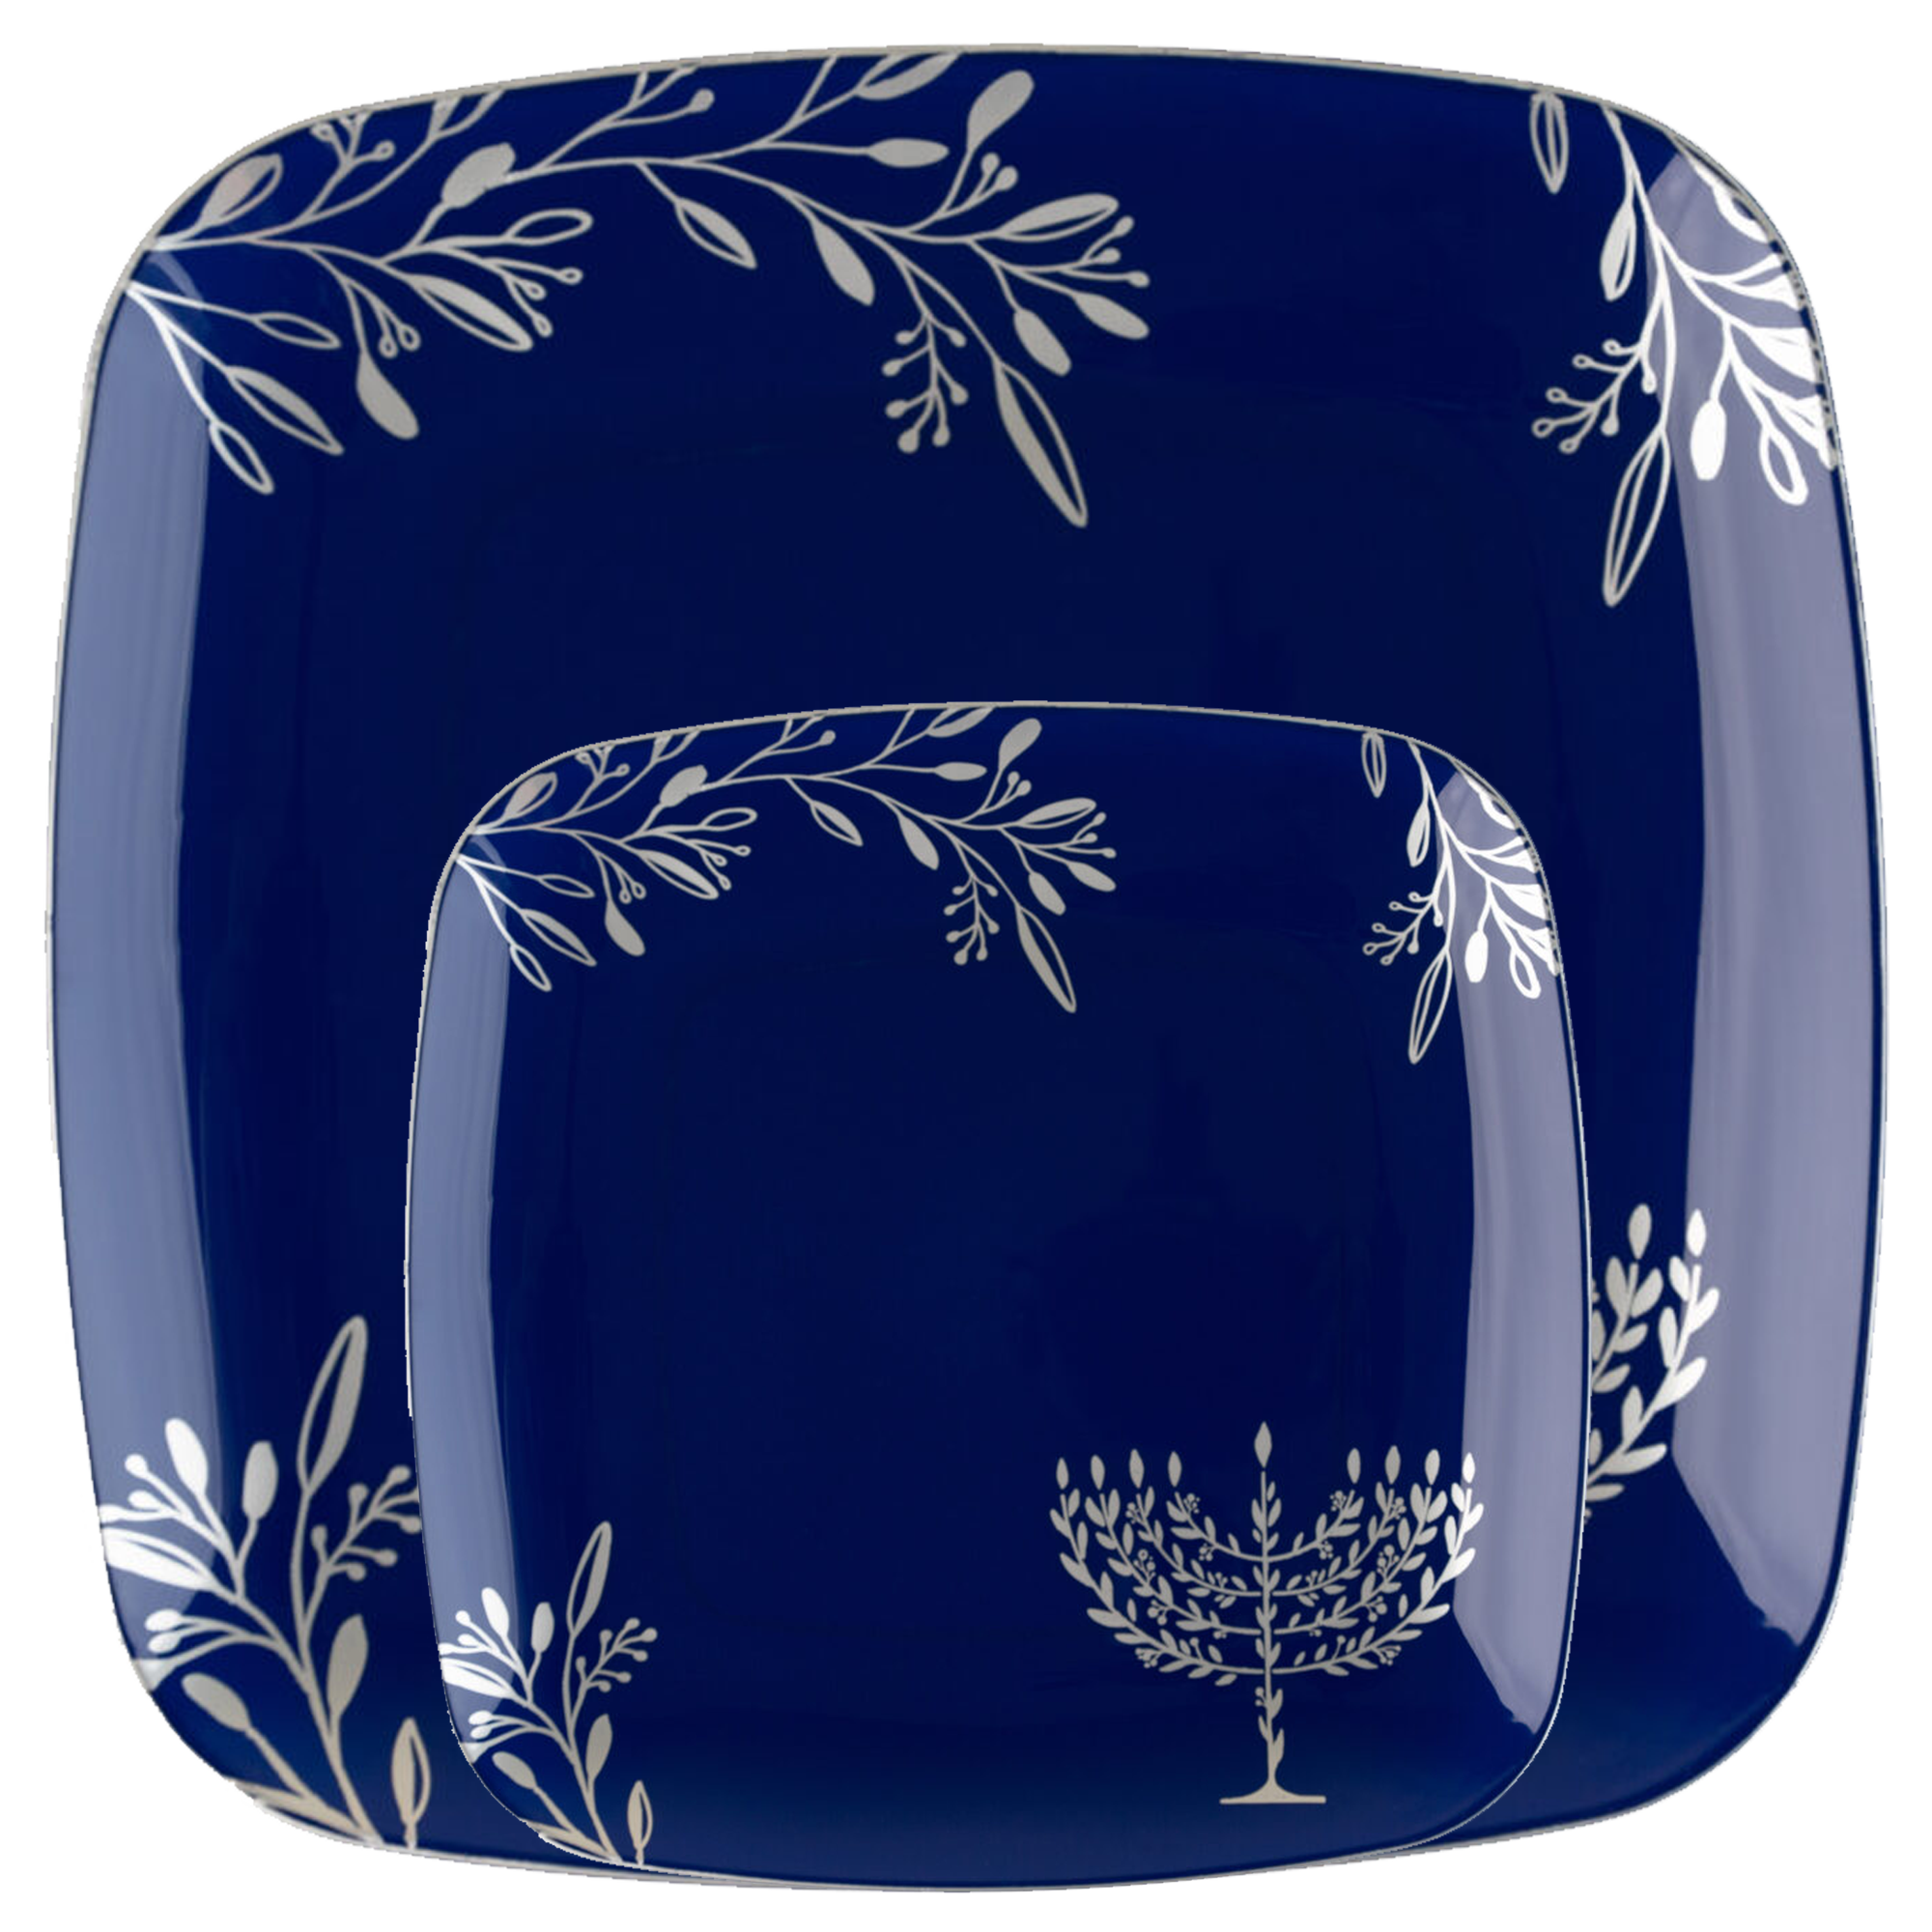 Chanukah Dessert Plate Dinner Plate Blue Charger Plate 10 inch 7 inch Holiday Party Hanukkah Disposable Plates Cobalt Dinner Plates